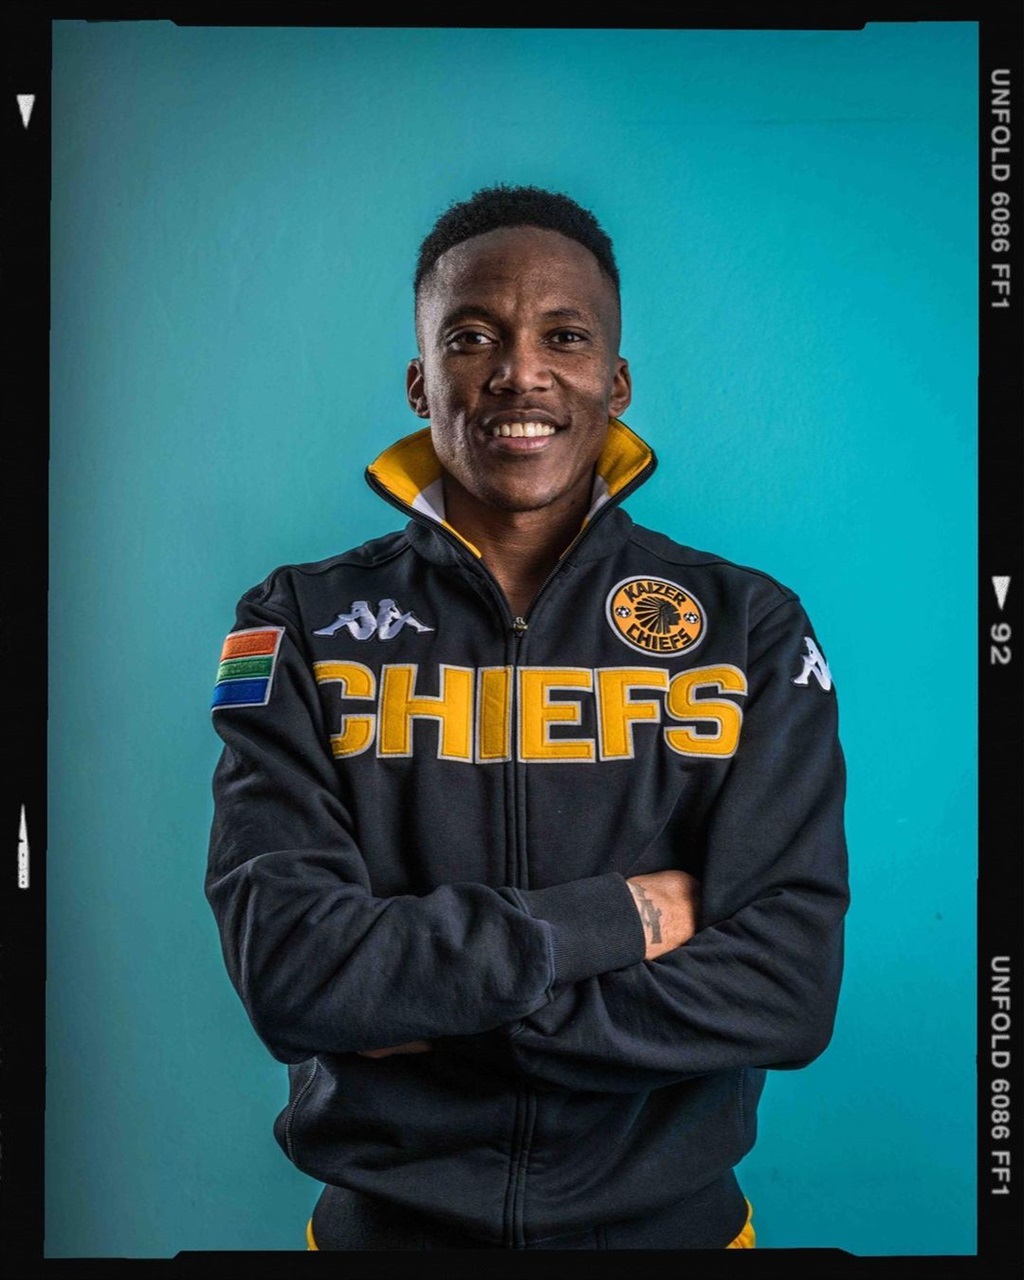 Kaizer Chiefs reveal their new signings wearing the club's latest Kappa merchandise.